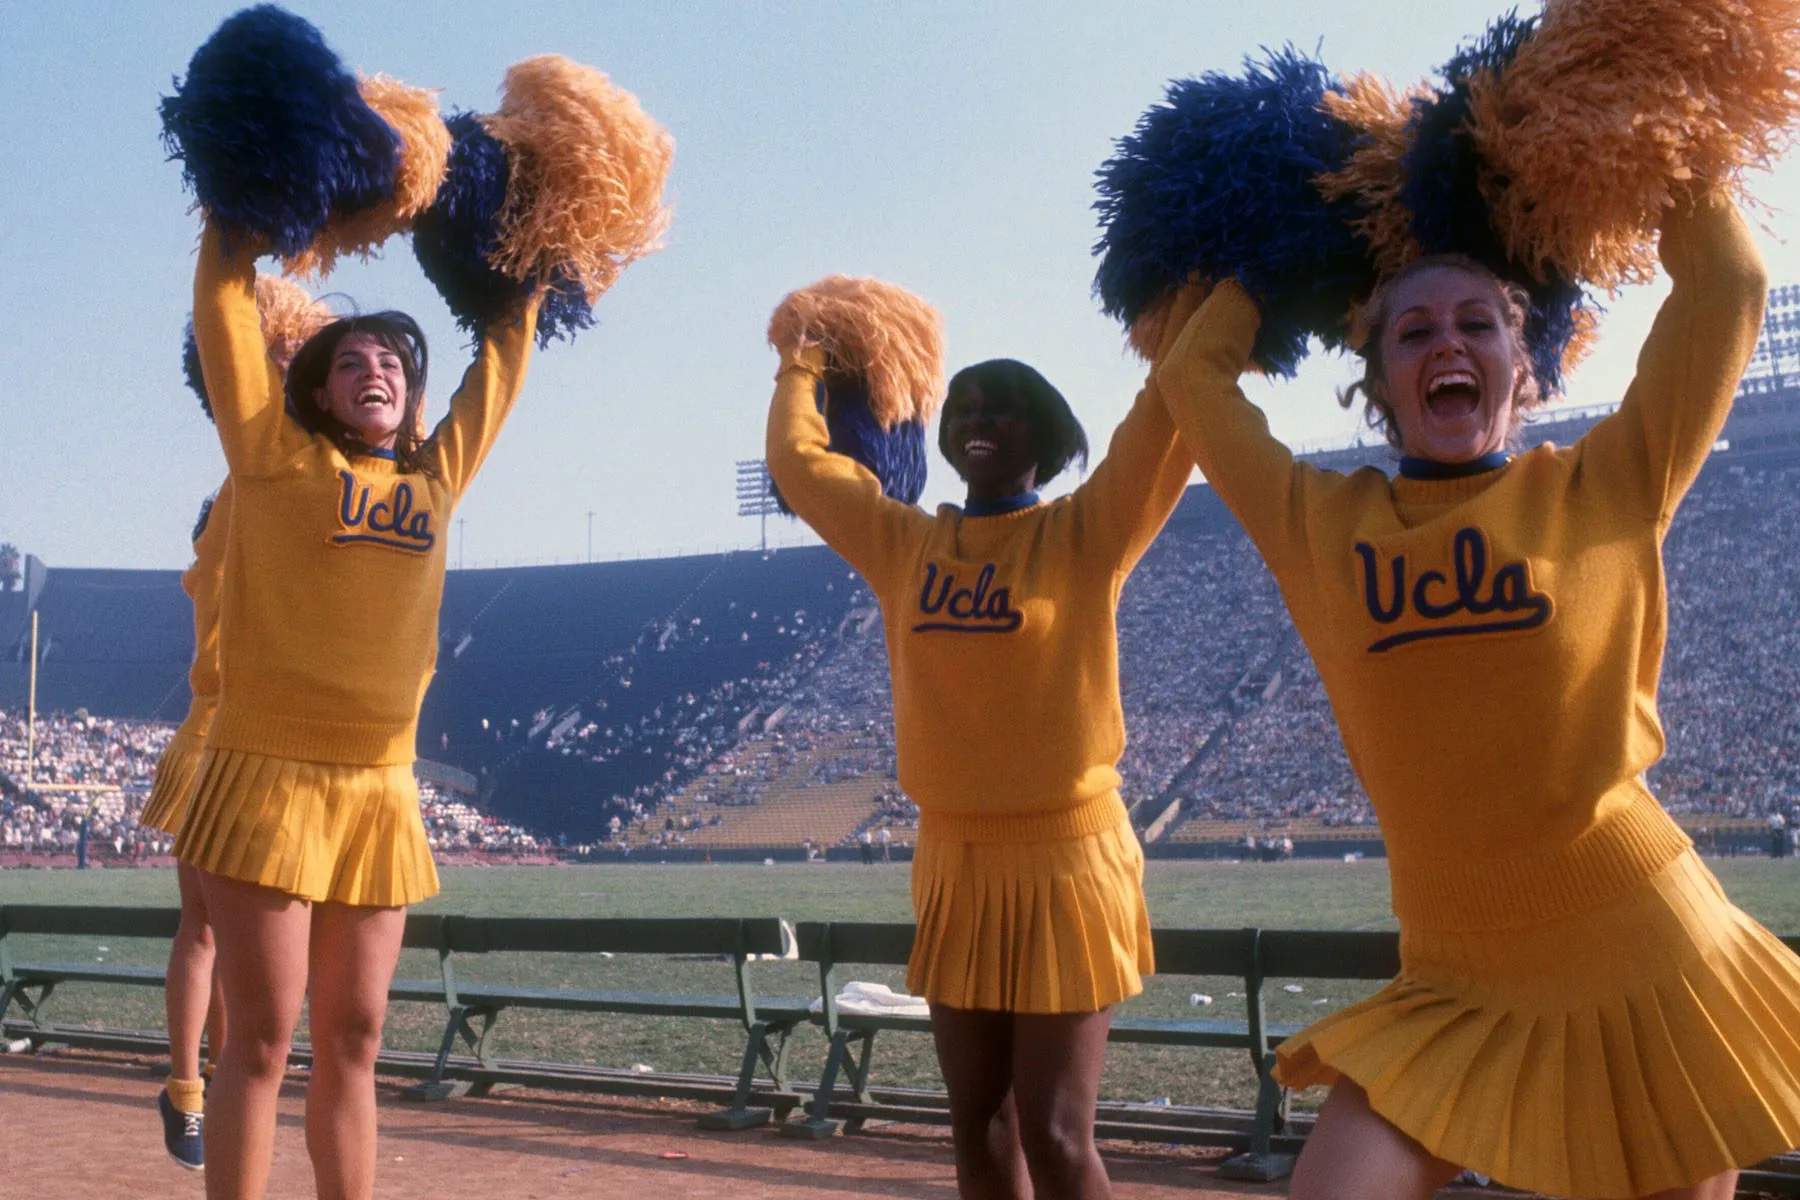 Cheerleaders for the University of California Los Angeles Bruins celebrate by waving their pompoms.